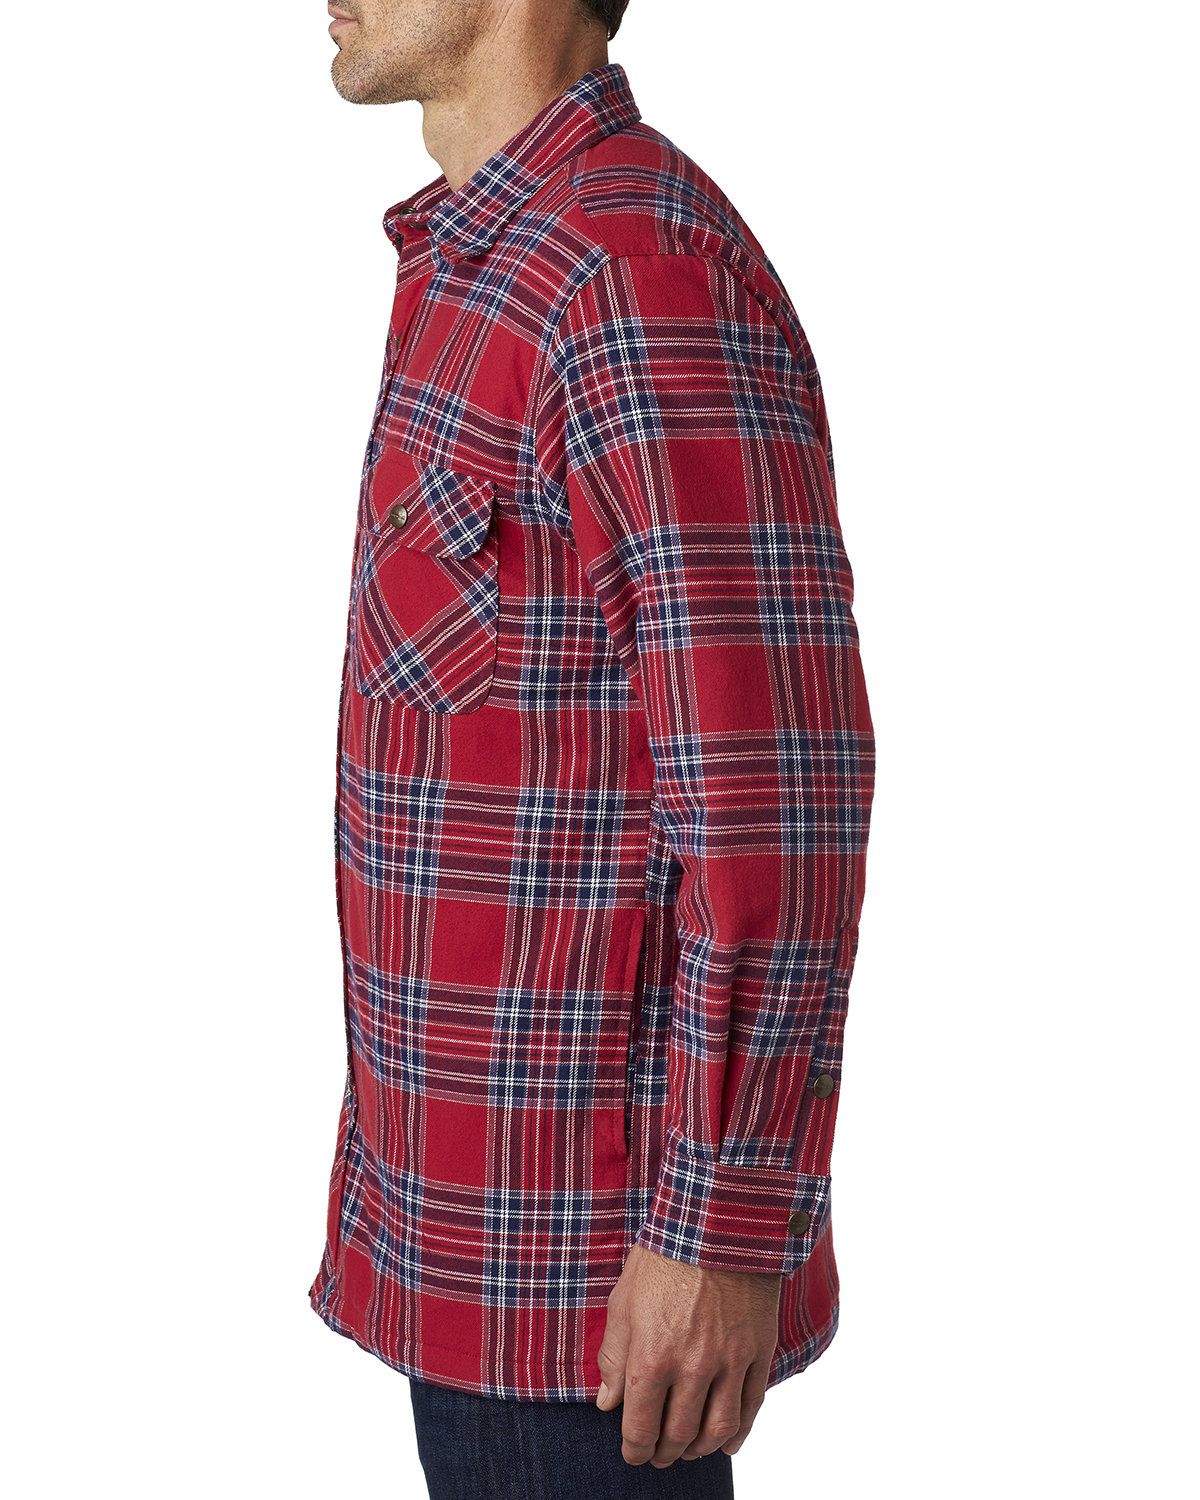 'Backpacker BP7002 Men's Flannel Shirt Jacket with Quilt Lining'